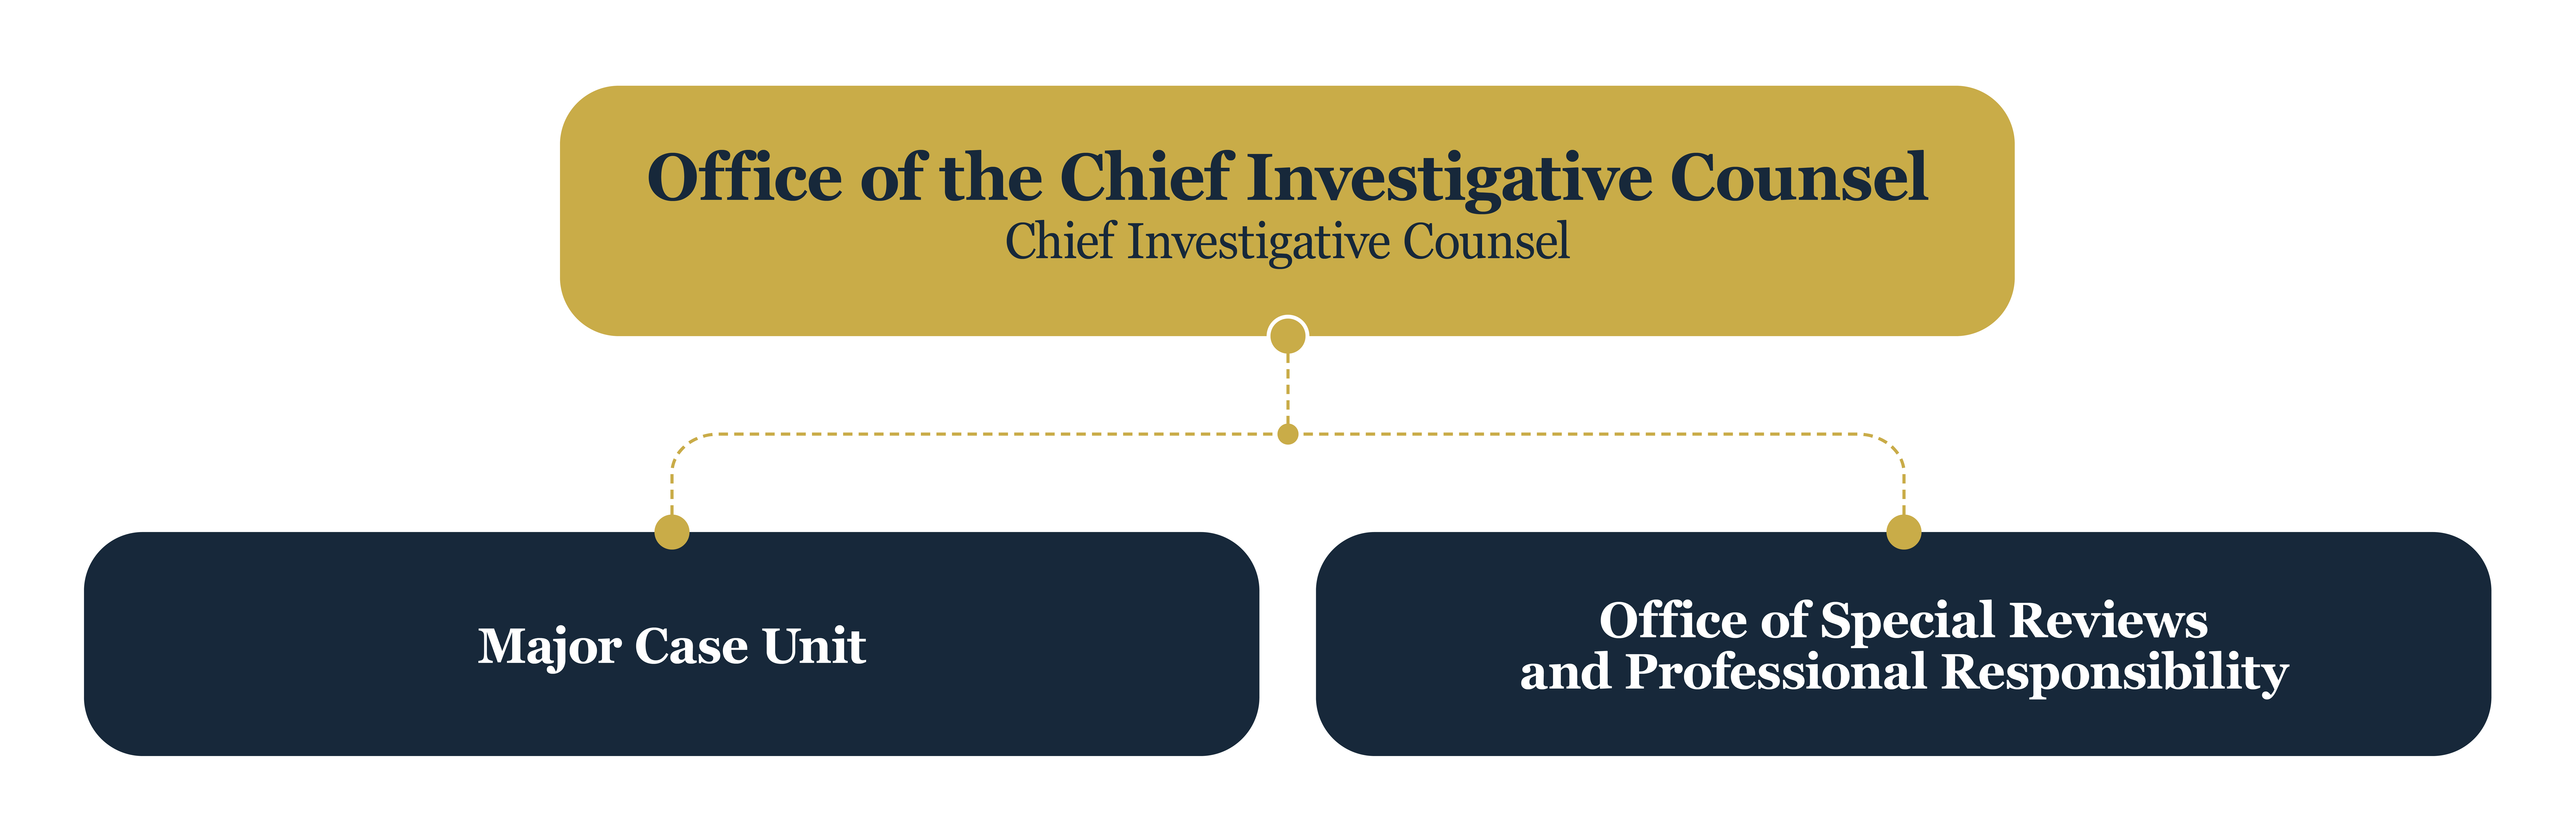 office of the chief investigative counsel